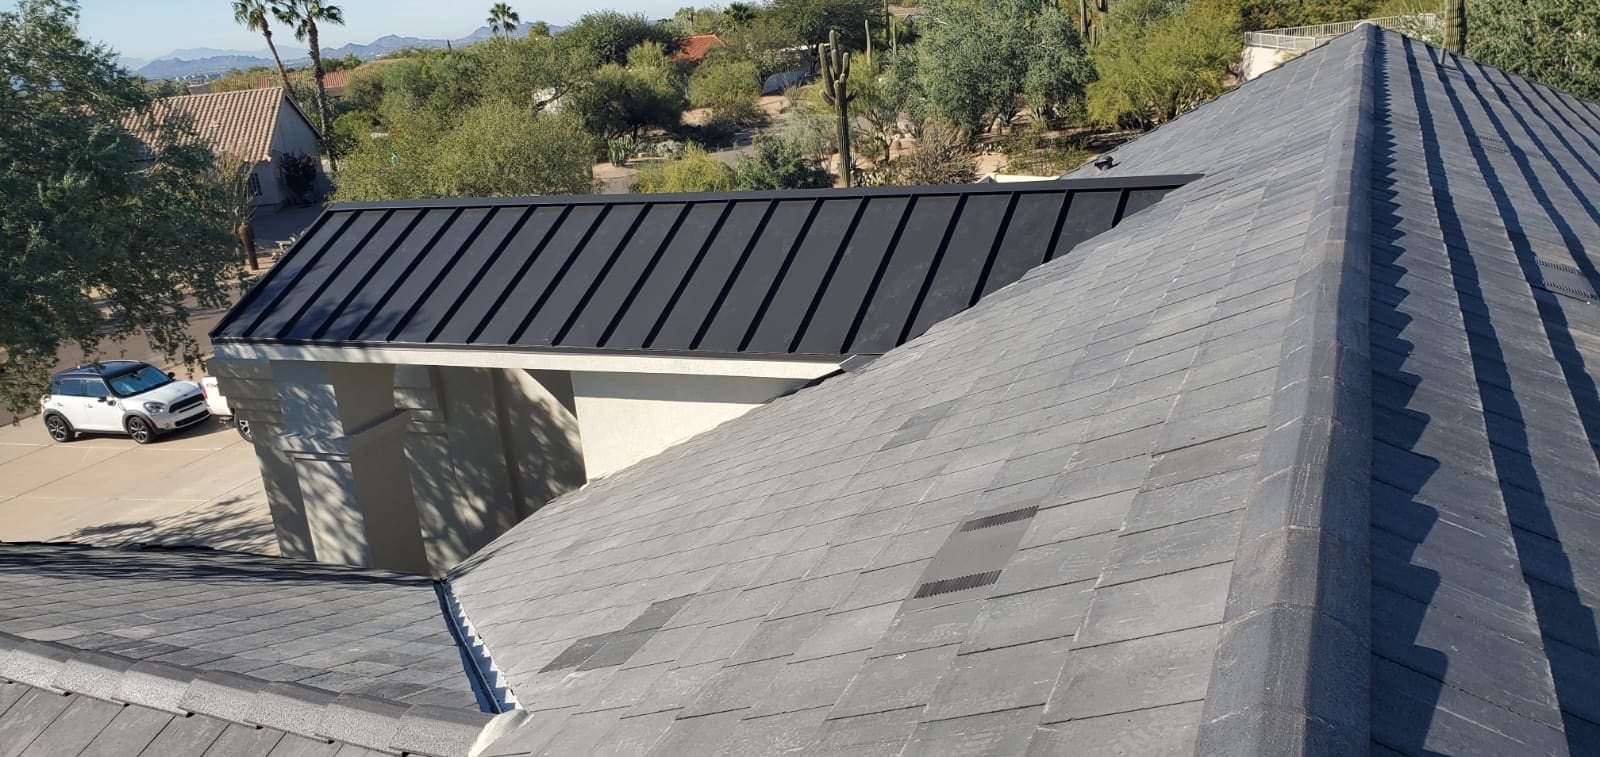 Behmer roofing contractor installed a black metal roof on a house in the Biltmore area.